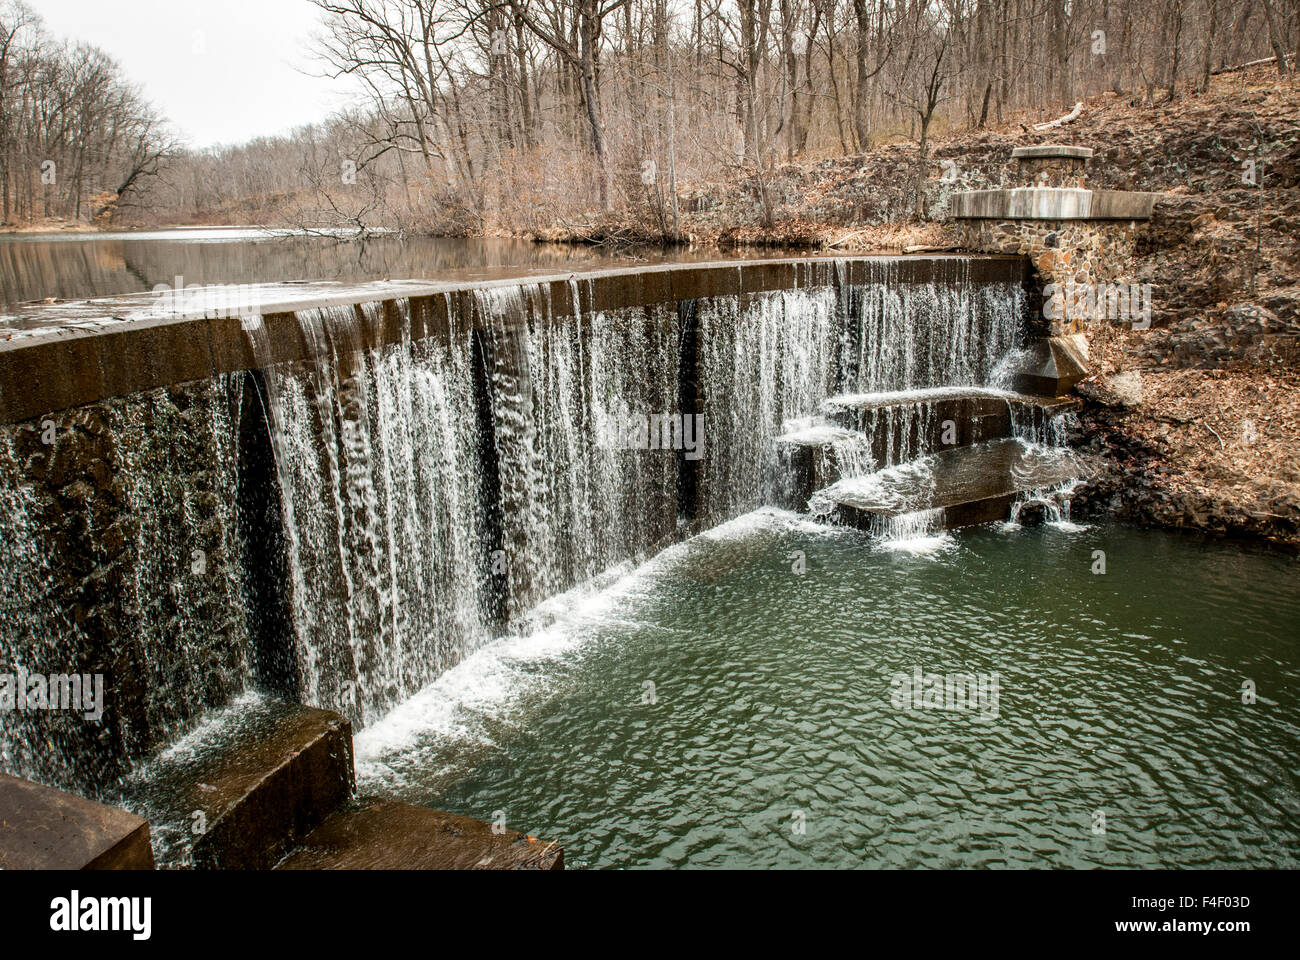 USA New Jersey, Watchung, Green Brook Basin, Watchung Reservation, Seeley's Pond in winter. Stock Photo